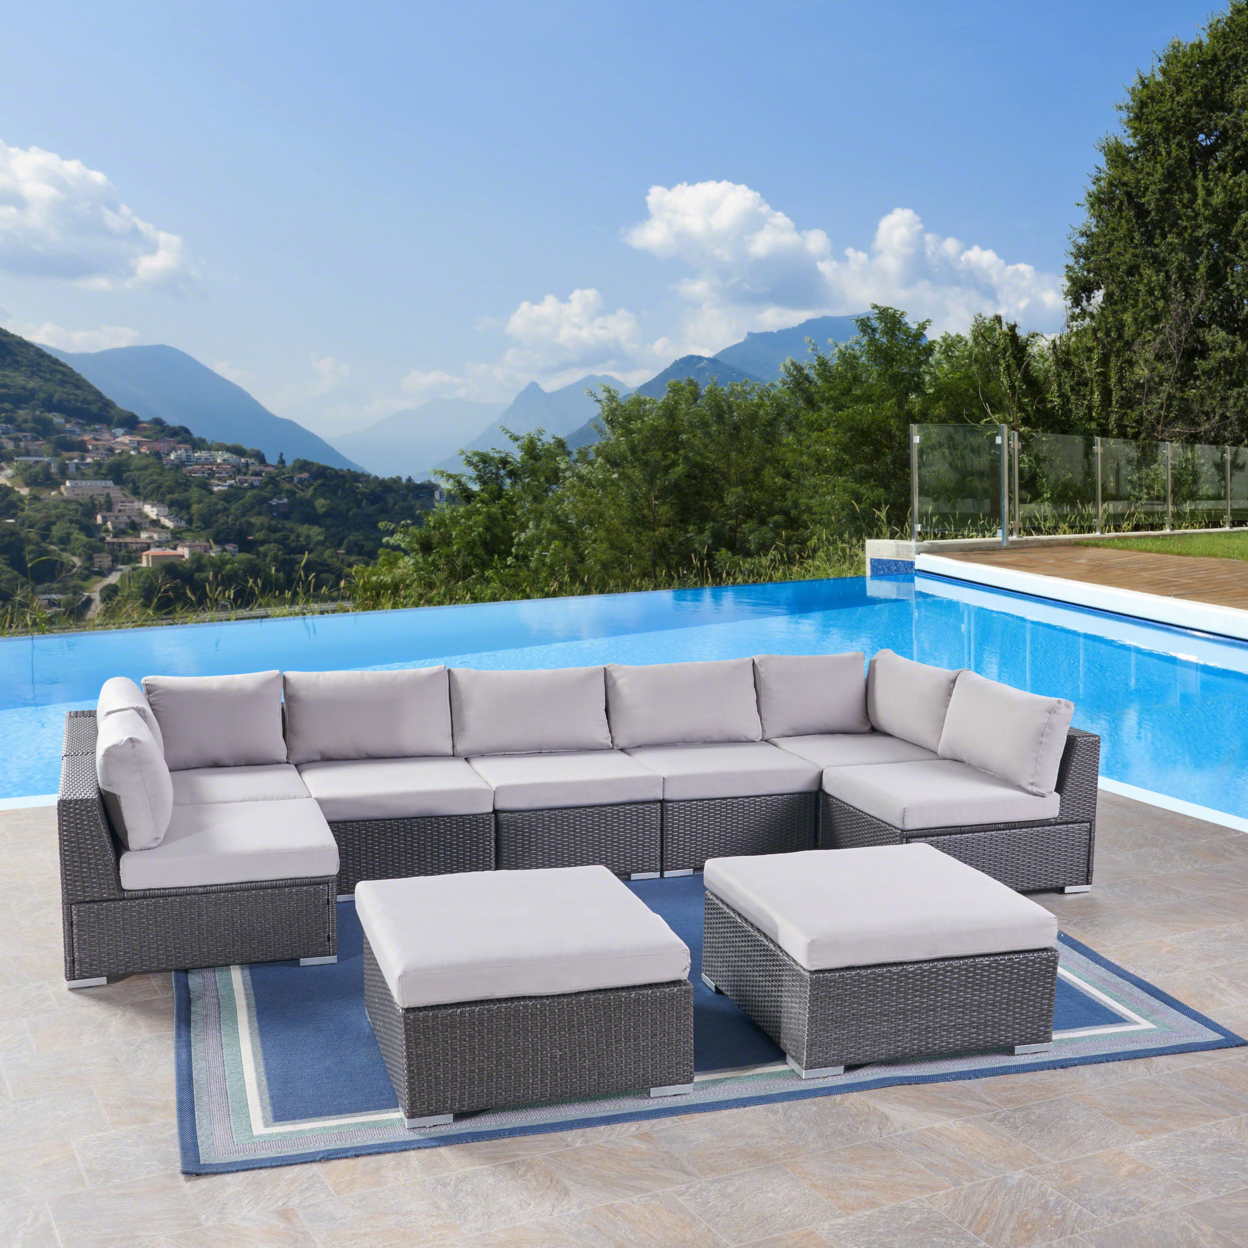 Tom Rosa Outdoor 7 Seater Wicker Sectional Sofa Set With Cushions - Gray Wicker